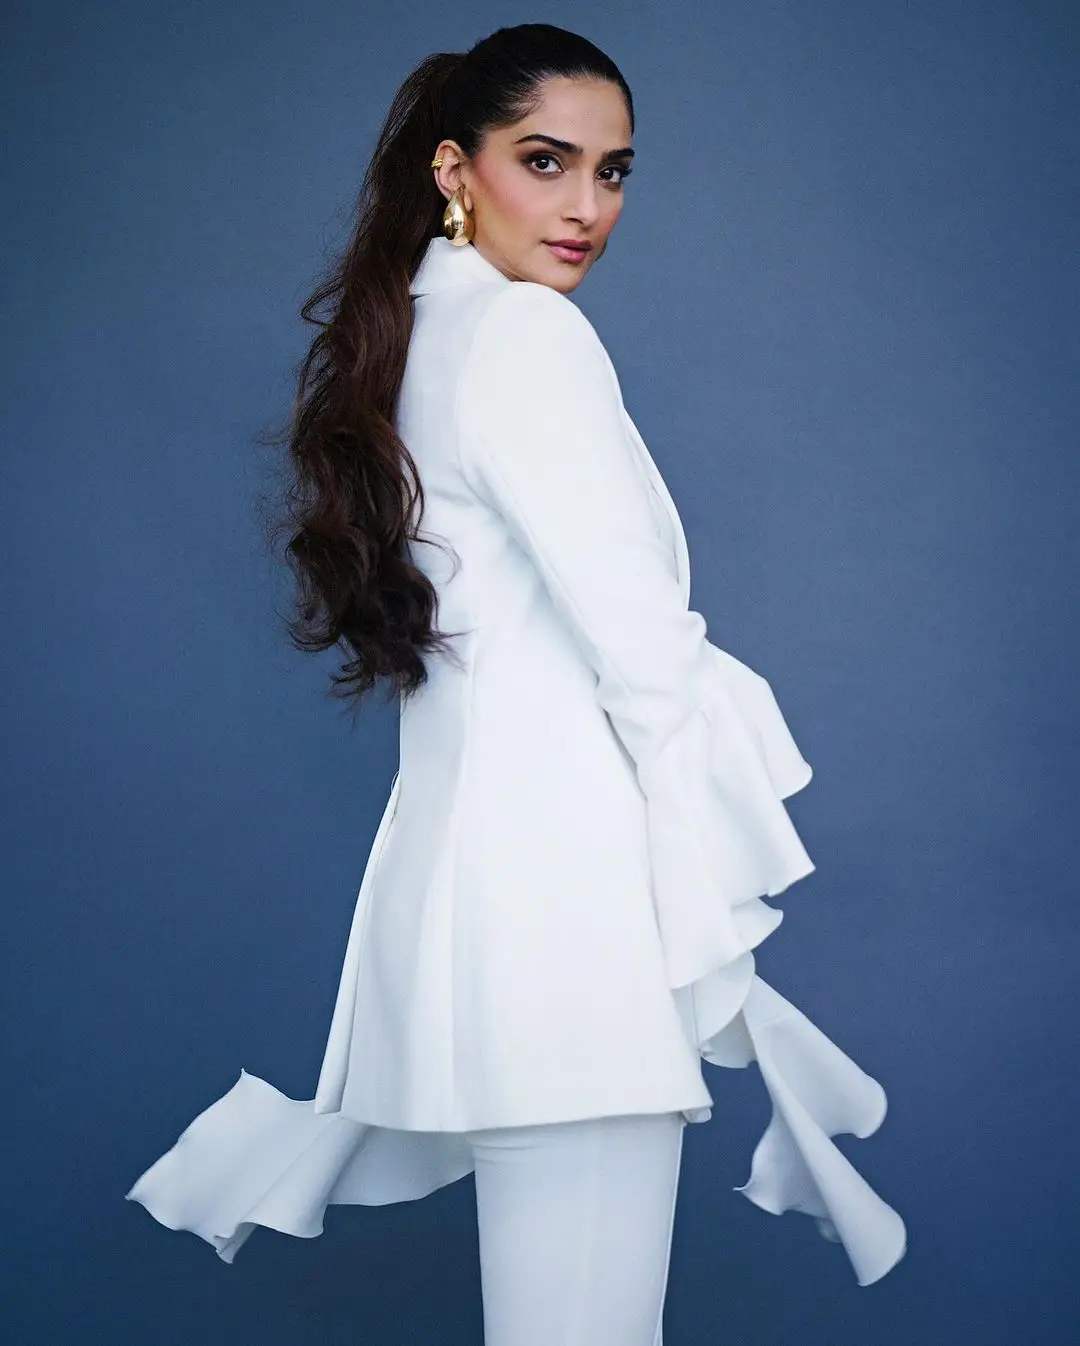 BOLLYWOOD ACTRESS SONAM KAPOOR PHOTOSHOOT IN LONG WHITE TOP PANT 9